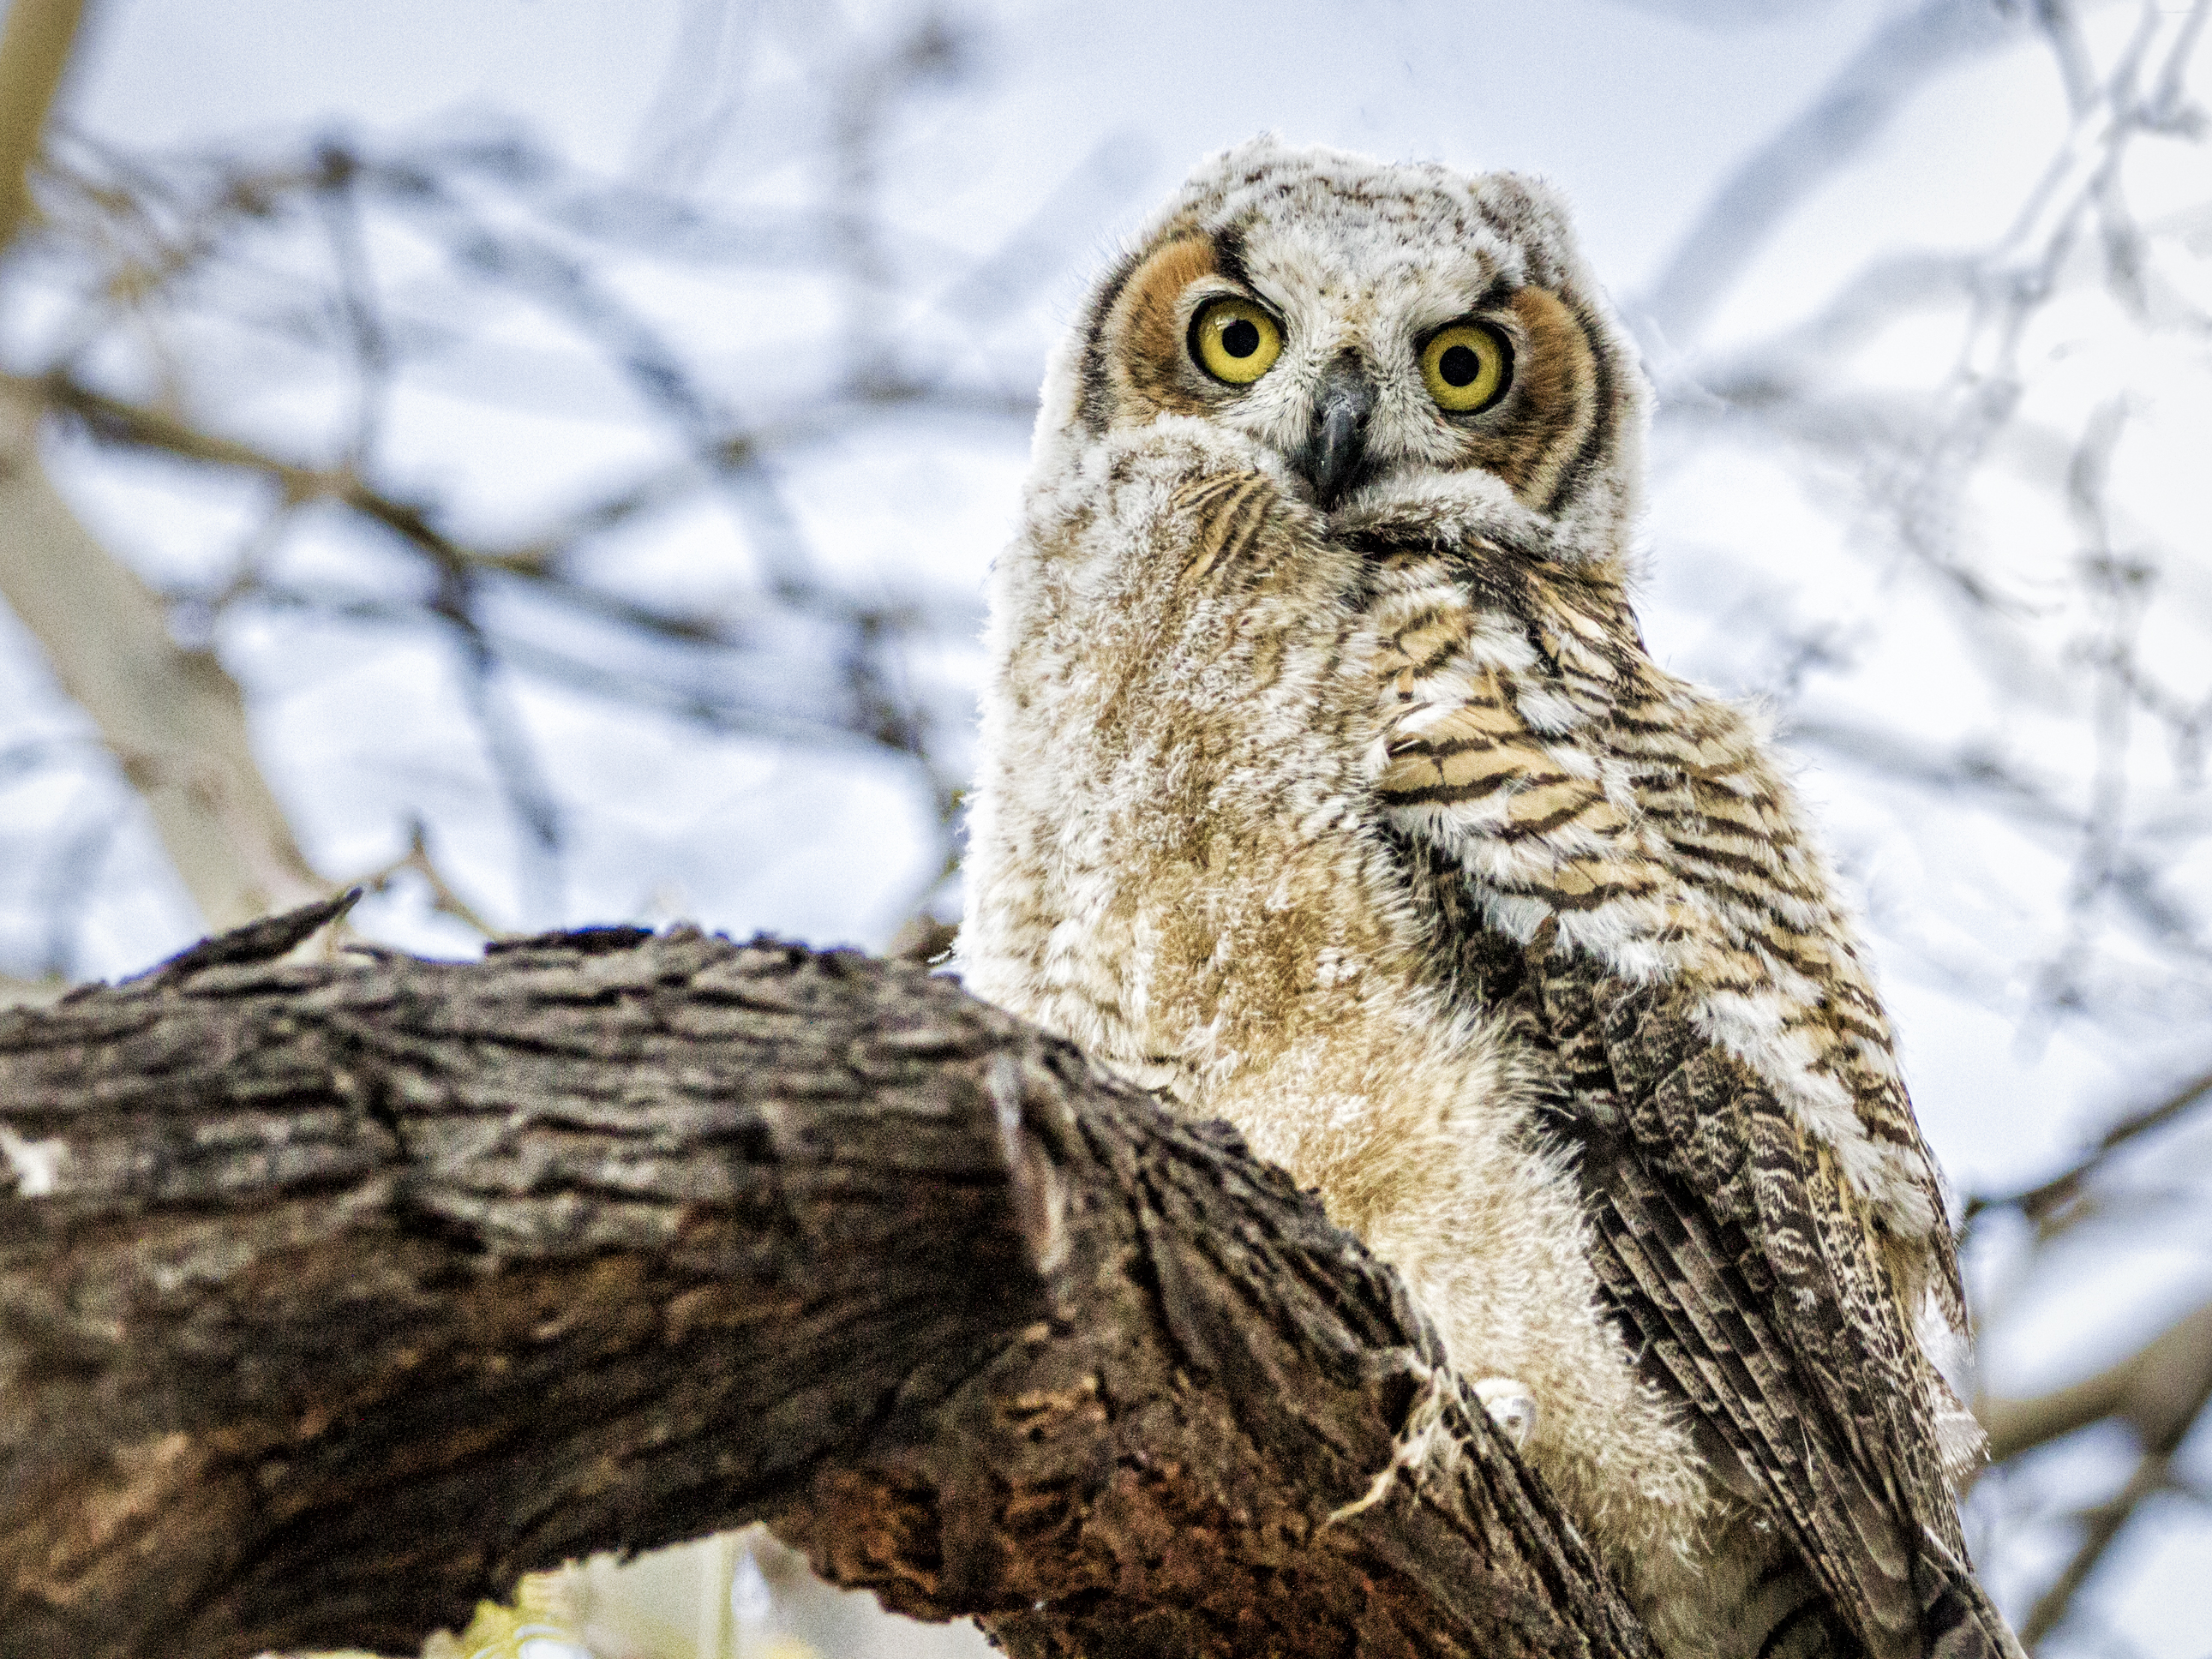 Photo by Raymond Lee  |  One of three sibling Great Horned Owls that hatched in the neighborhood.